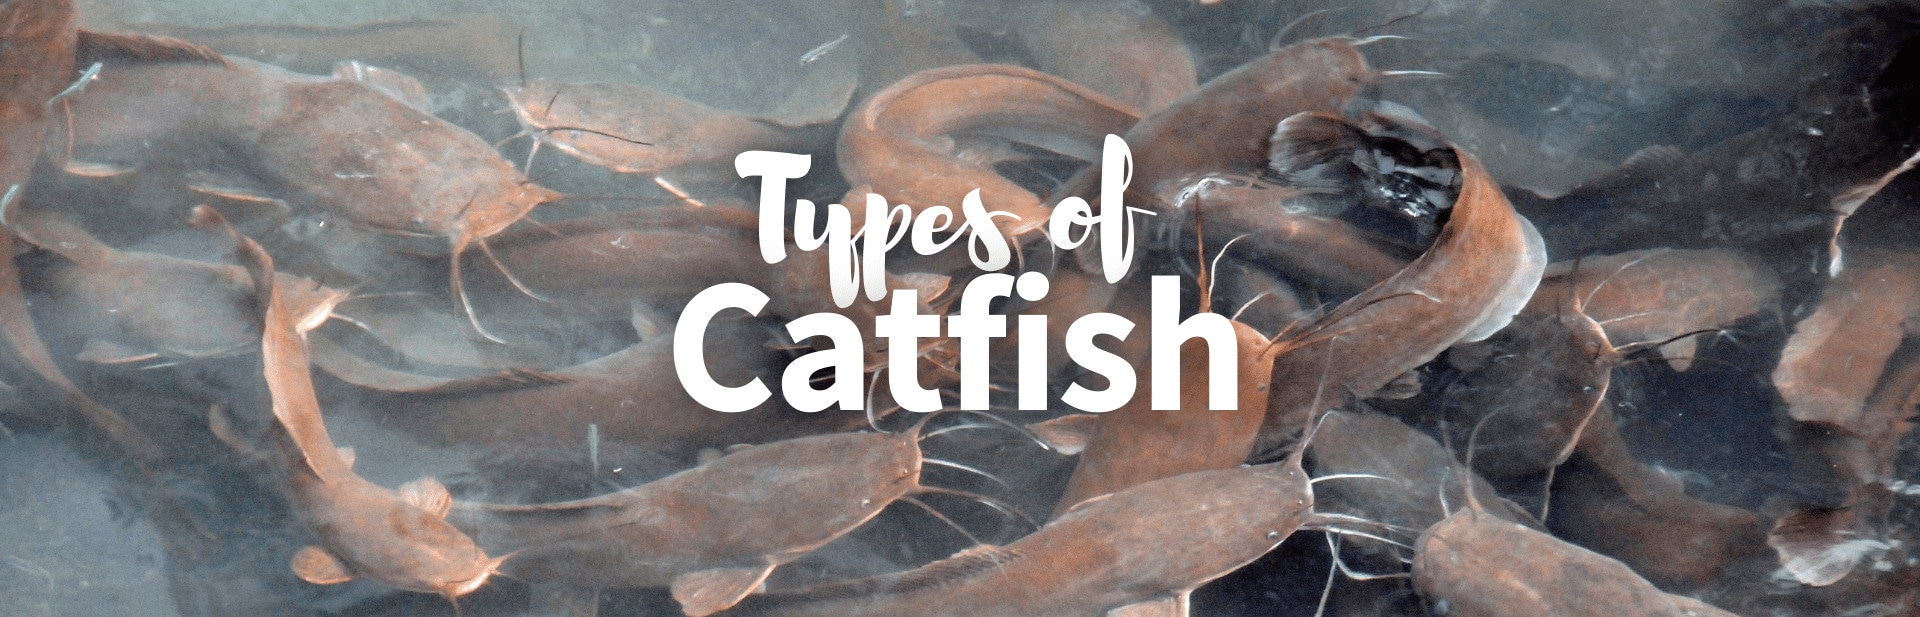 17 Different Types of Catfish: Pictures, Facts, and Guide